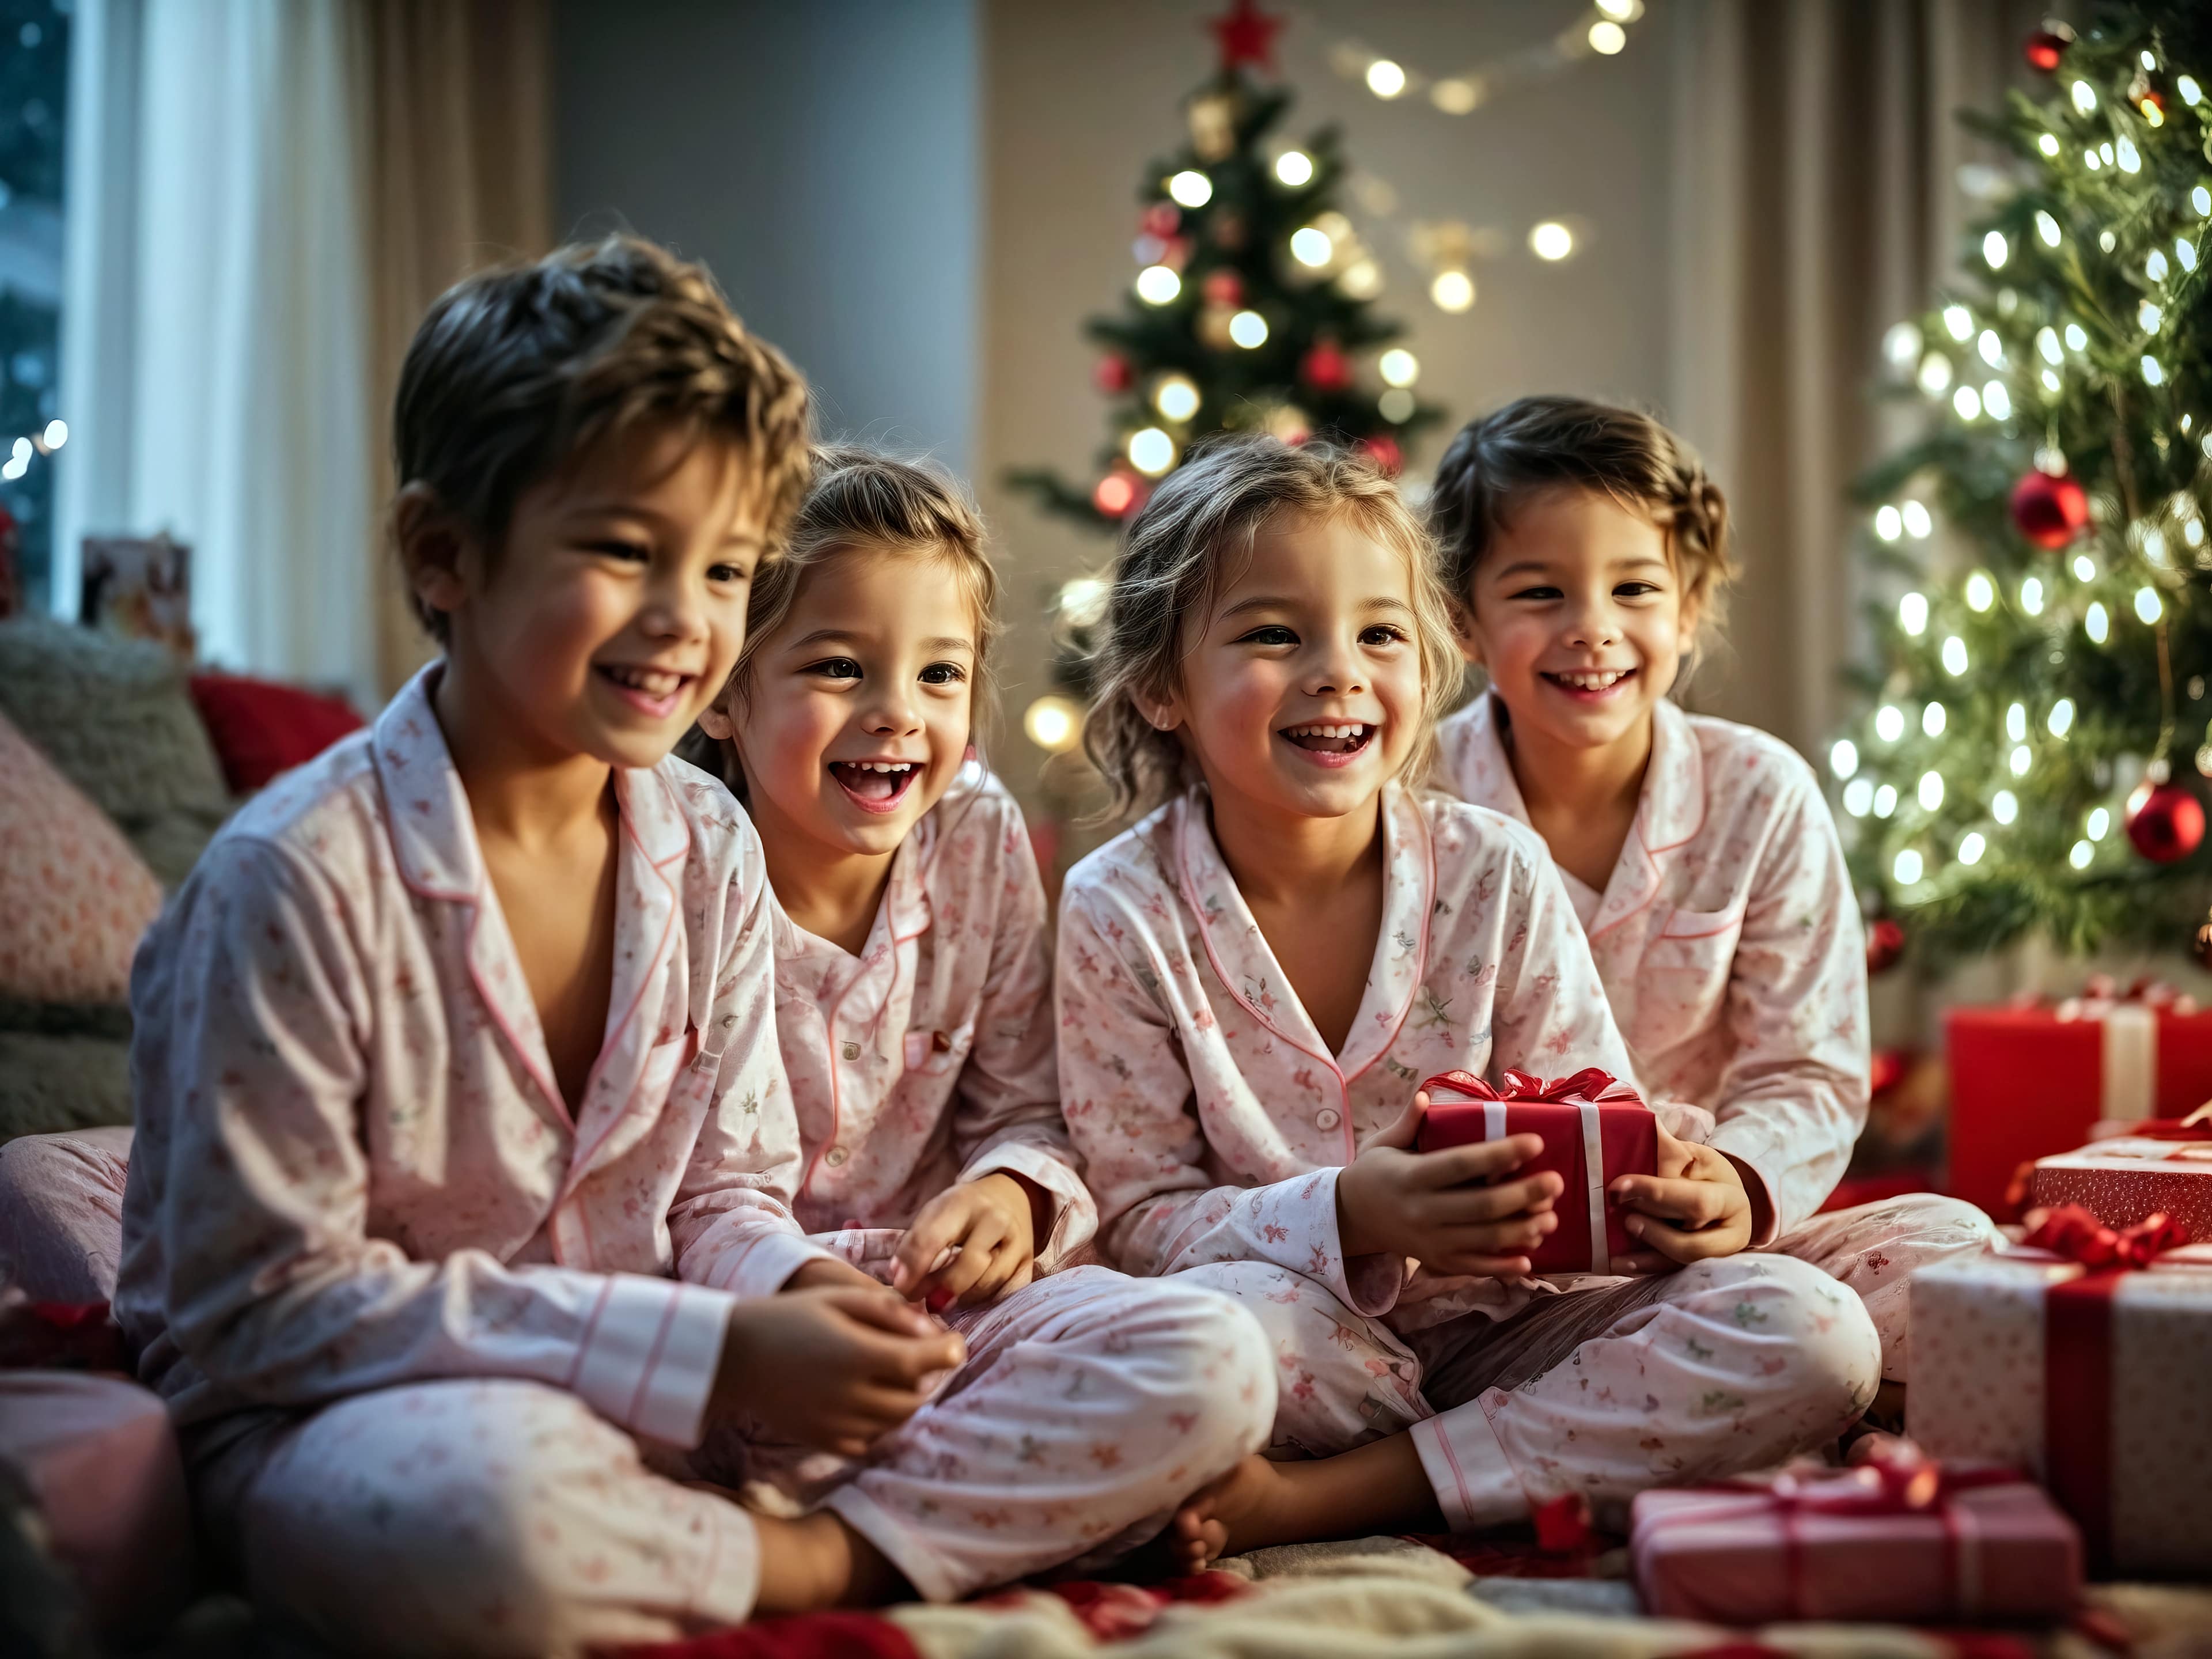 Four children wearing matching Christmas pyjamas, surrounded by Christmas presents and festive decorations